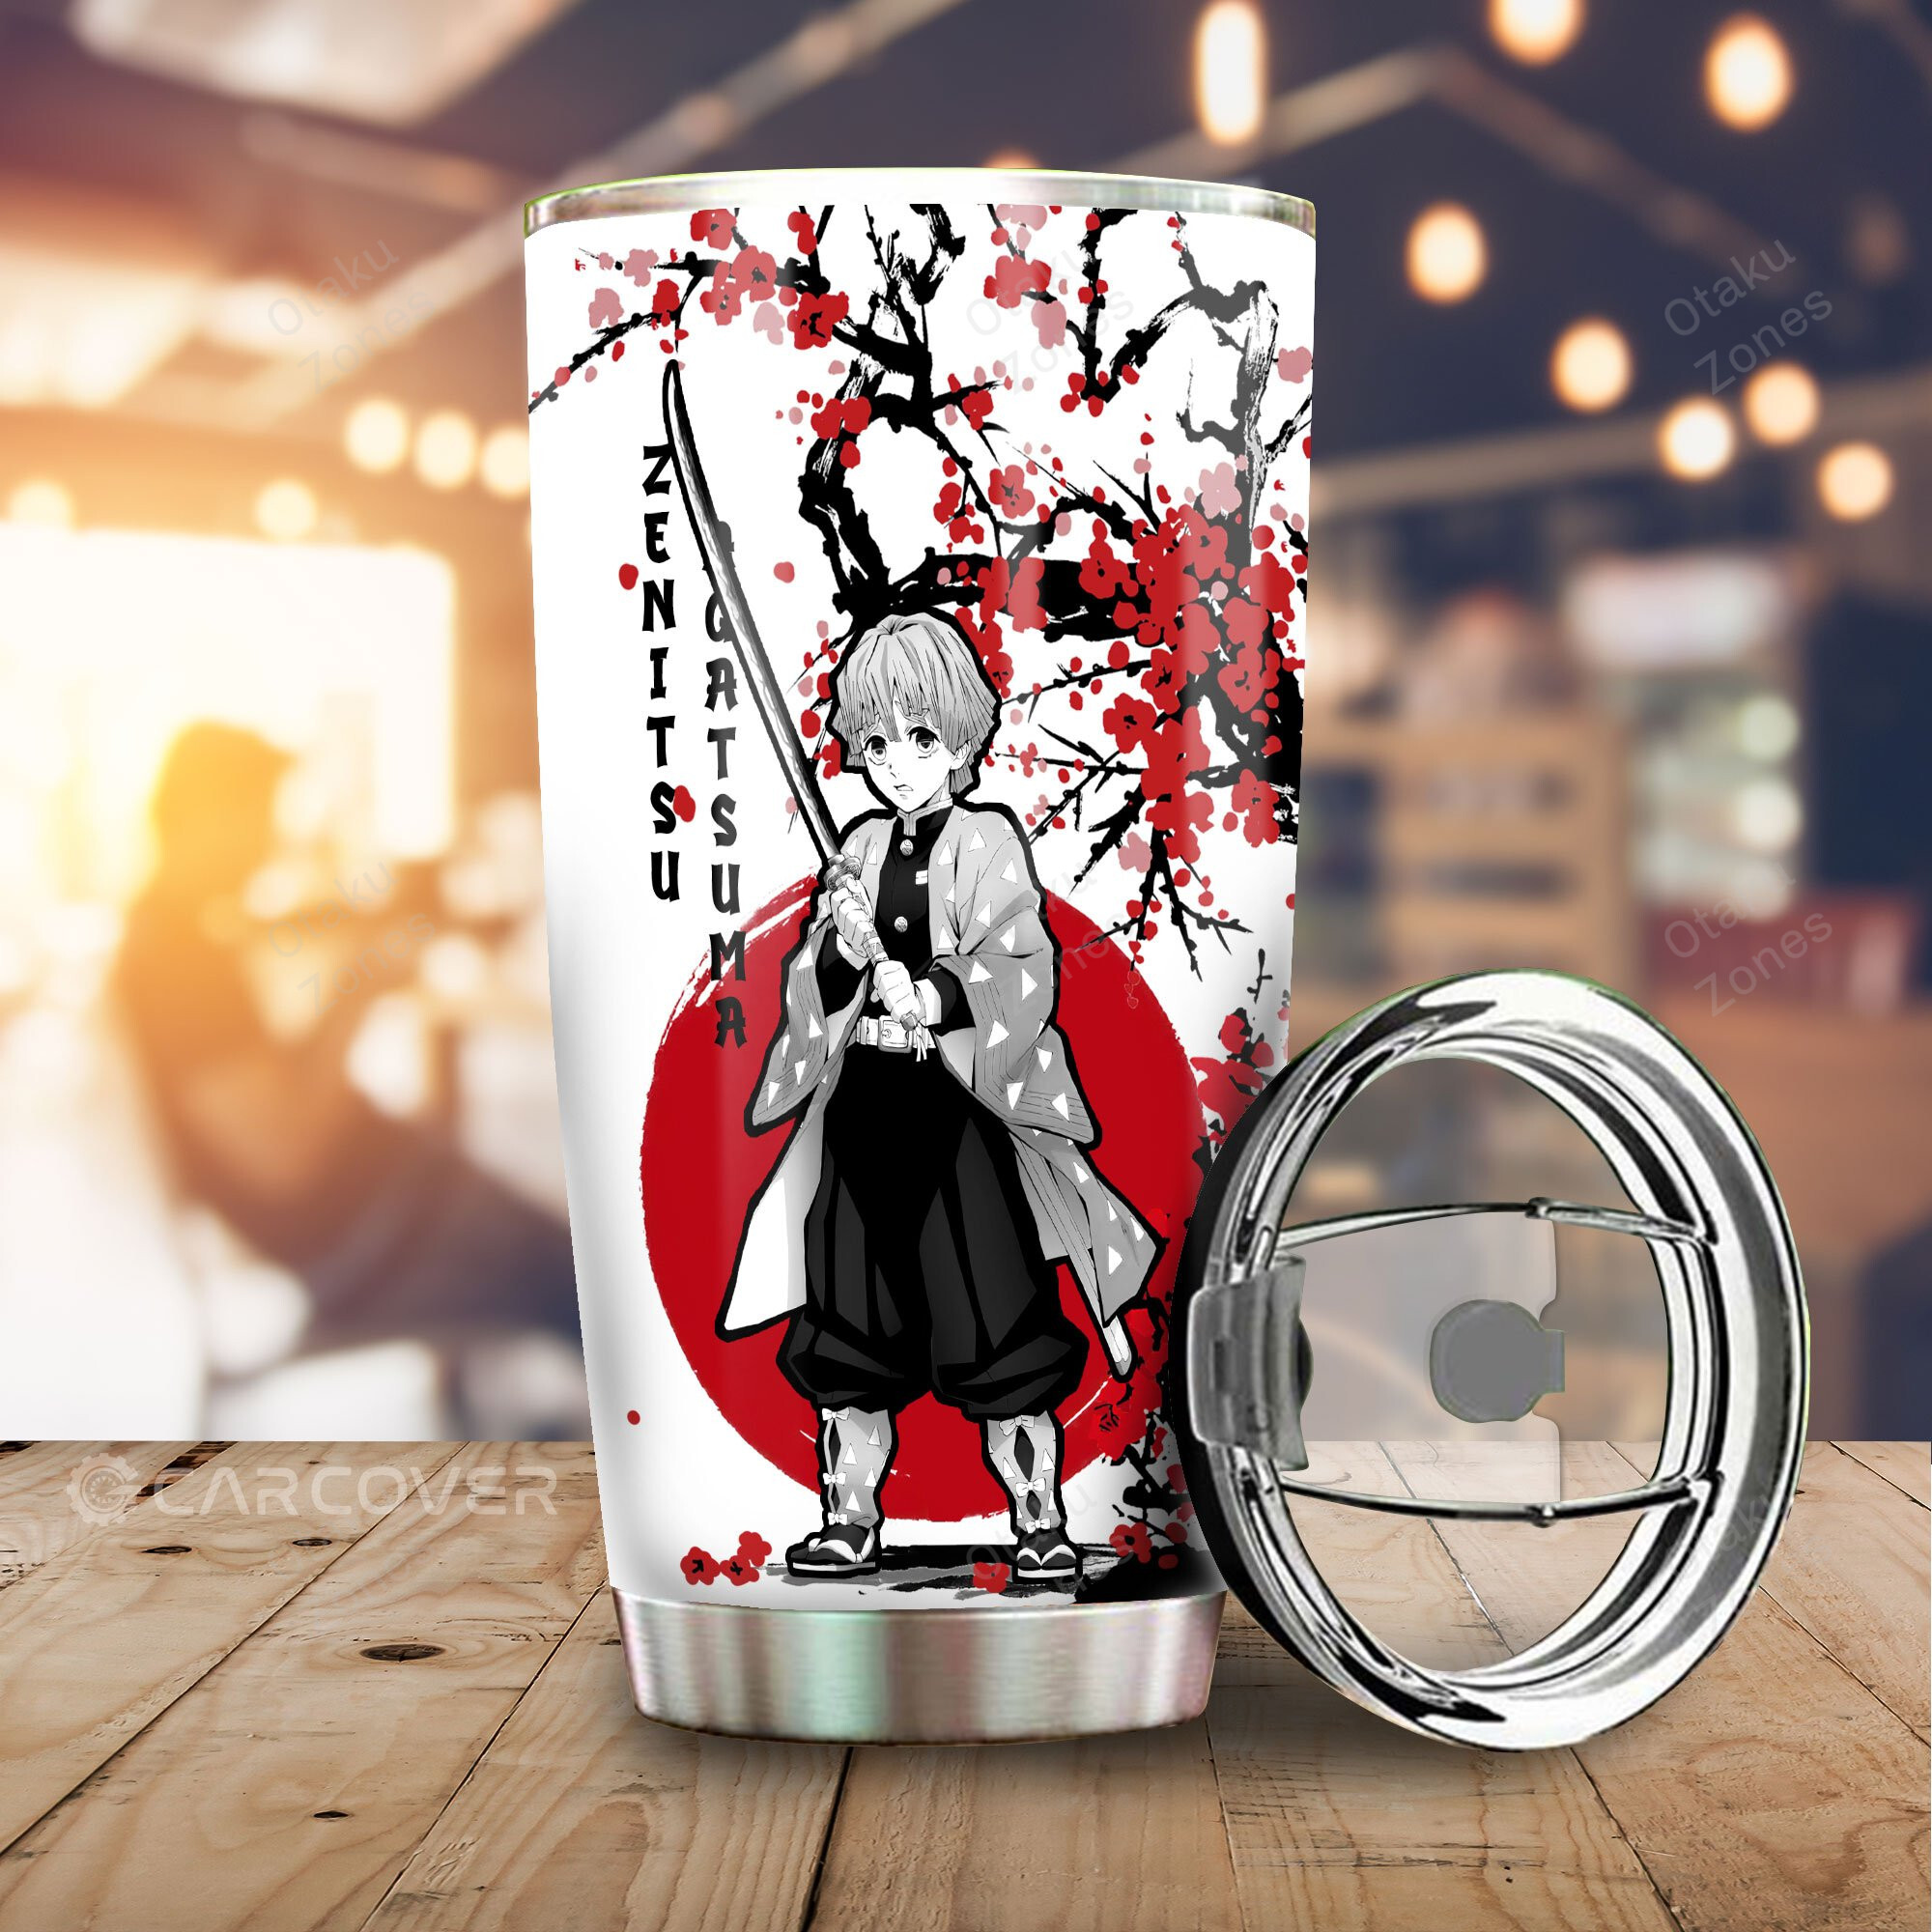 Show off your favorite Anime character in style with these products 14